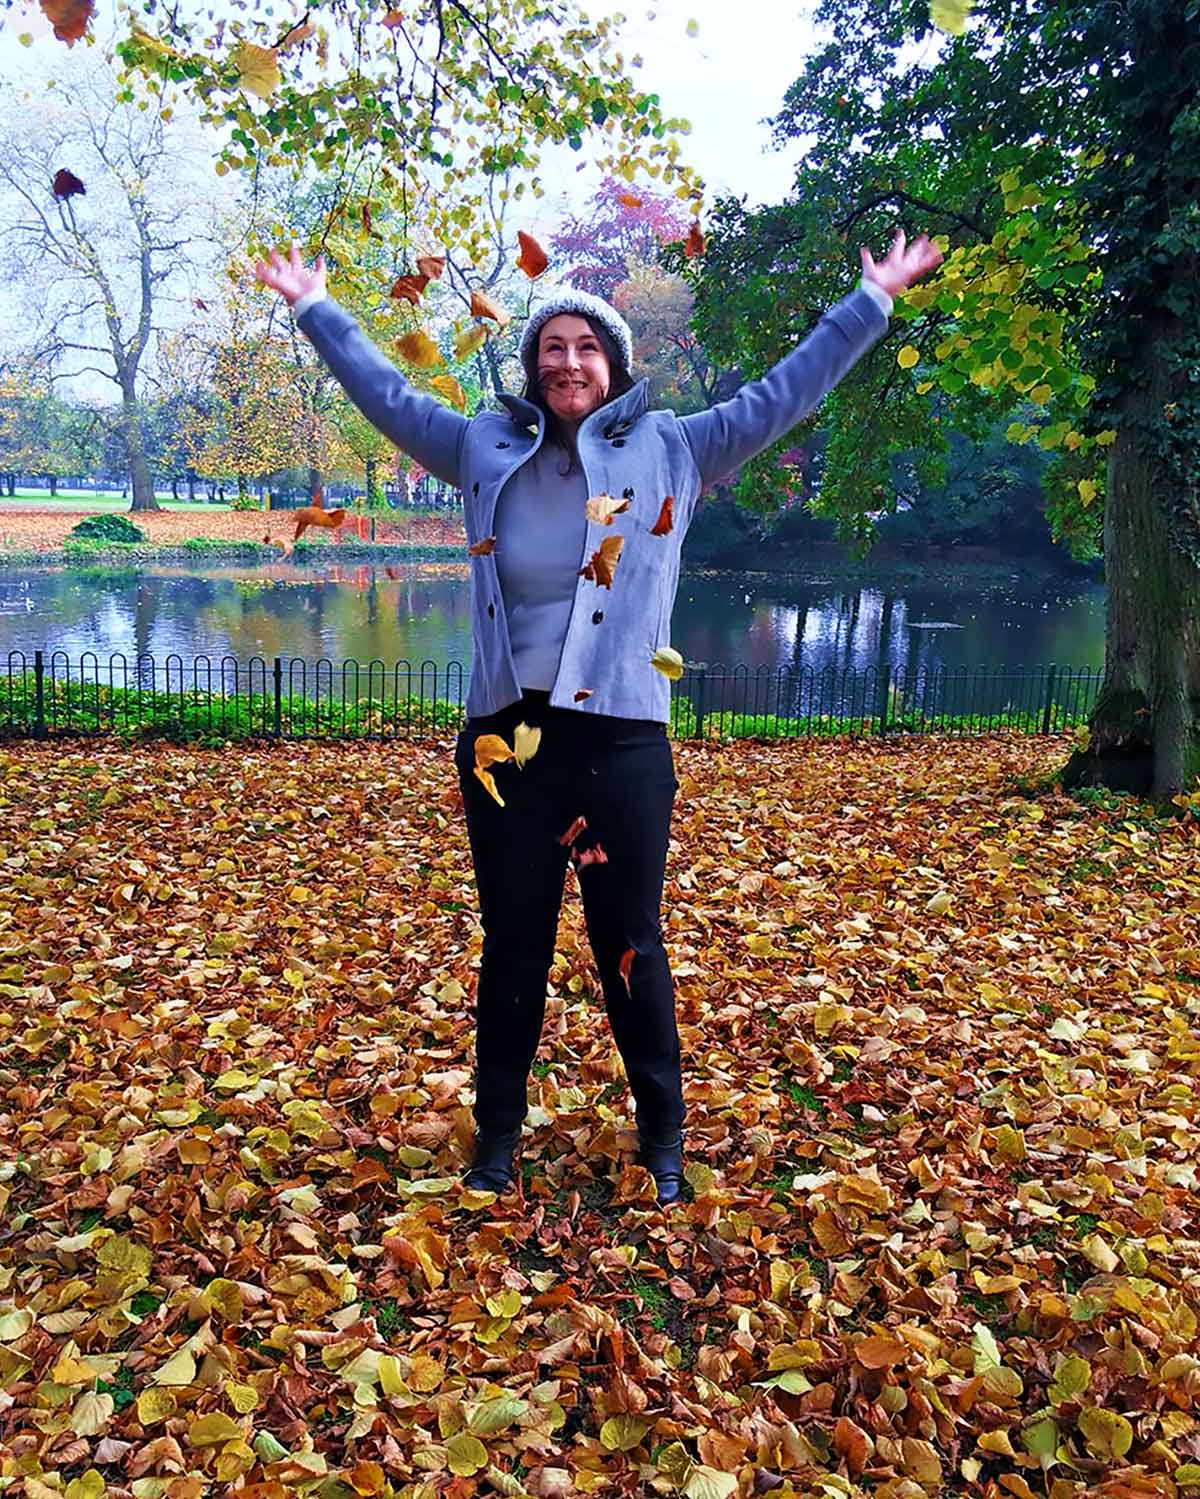 Dannii stood in a load of fallen leaves throwing some leaves in the air